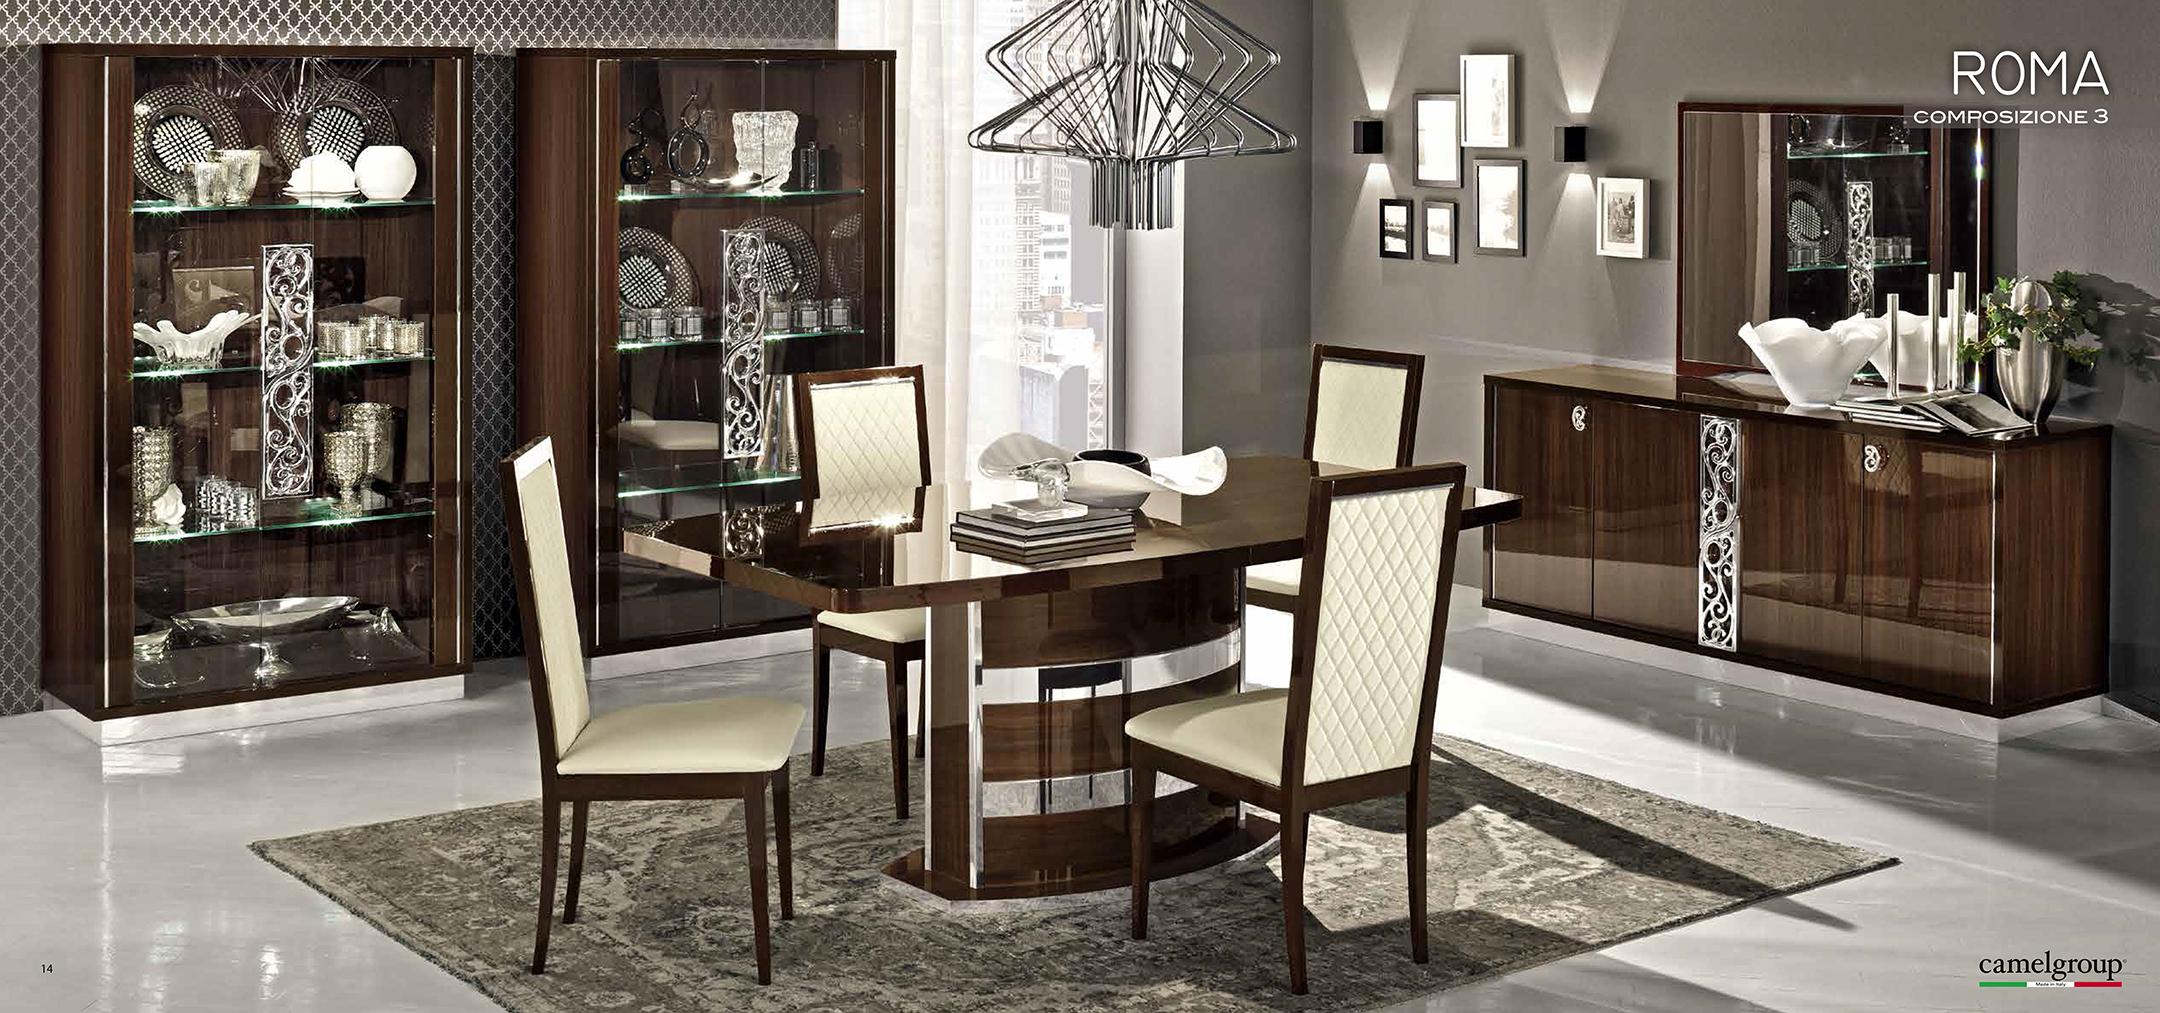 

    
ESF Roma High Gloss Walnut Lacquer Finish Dining Room Set 5 Pcs Made in Italy
